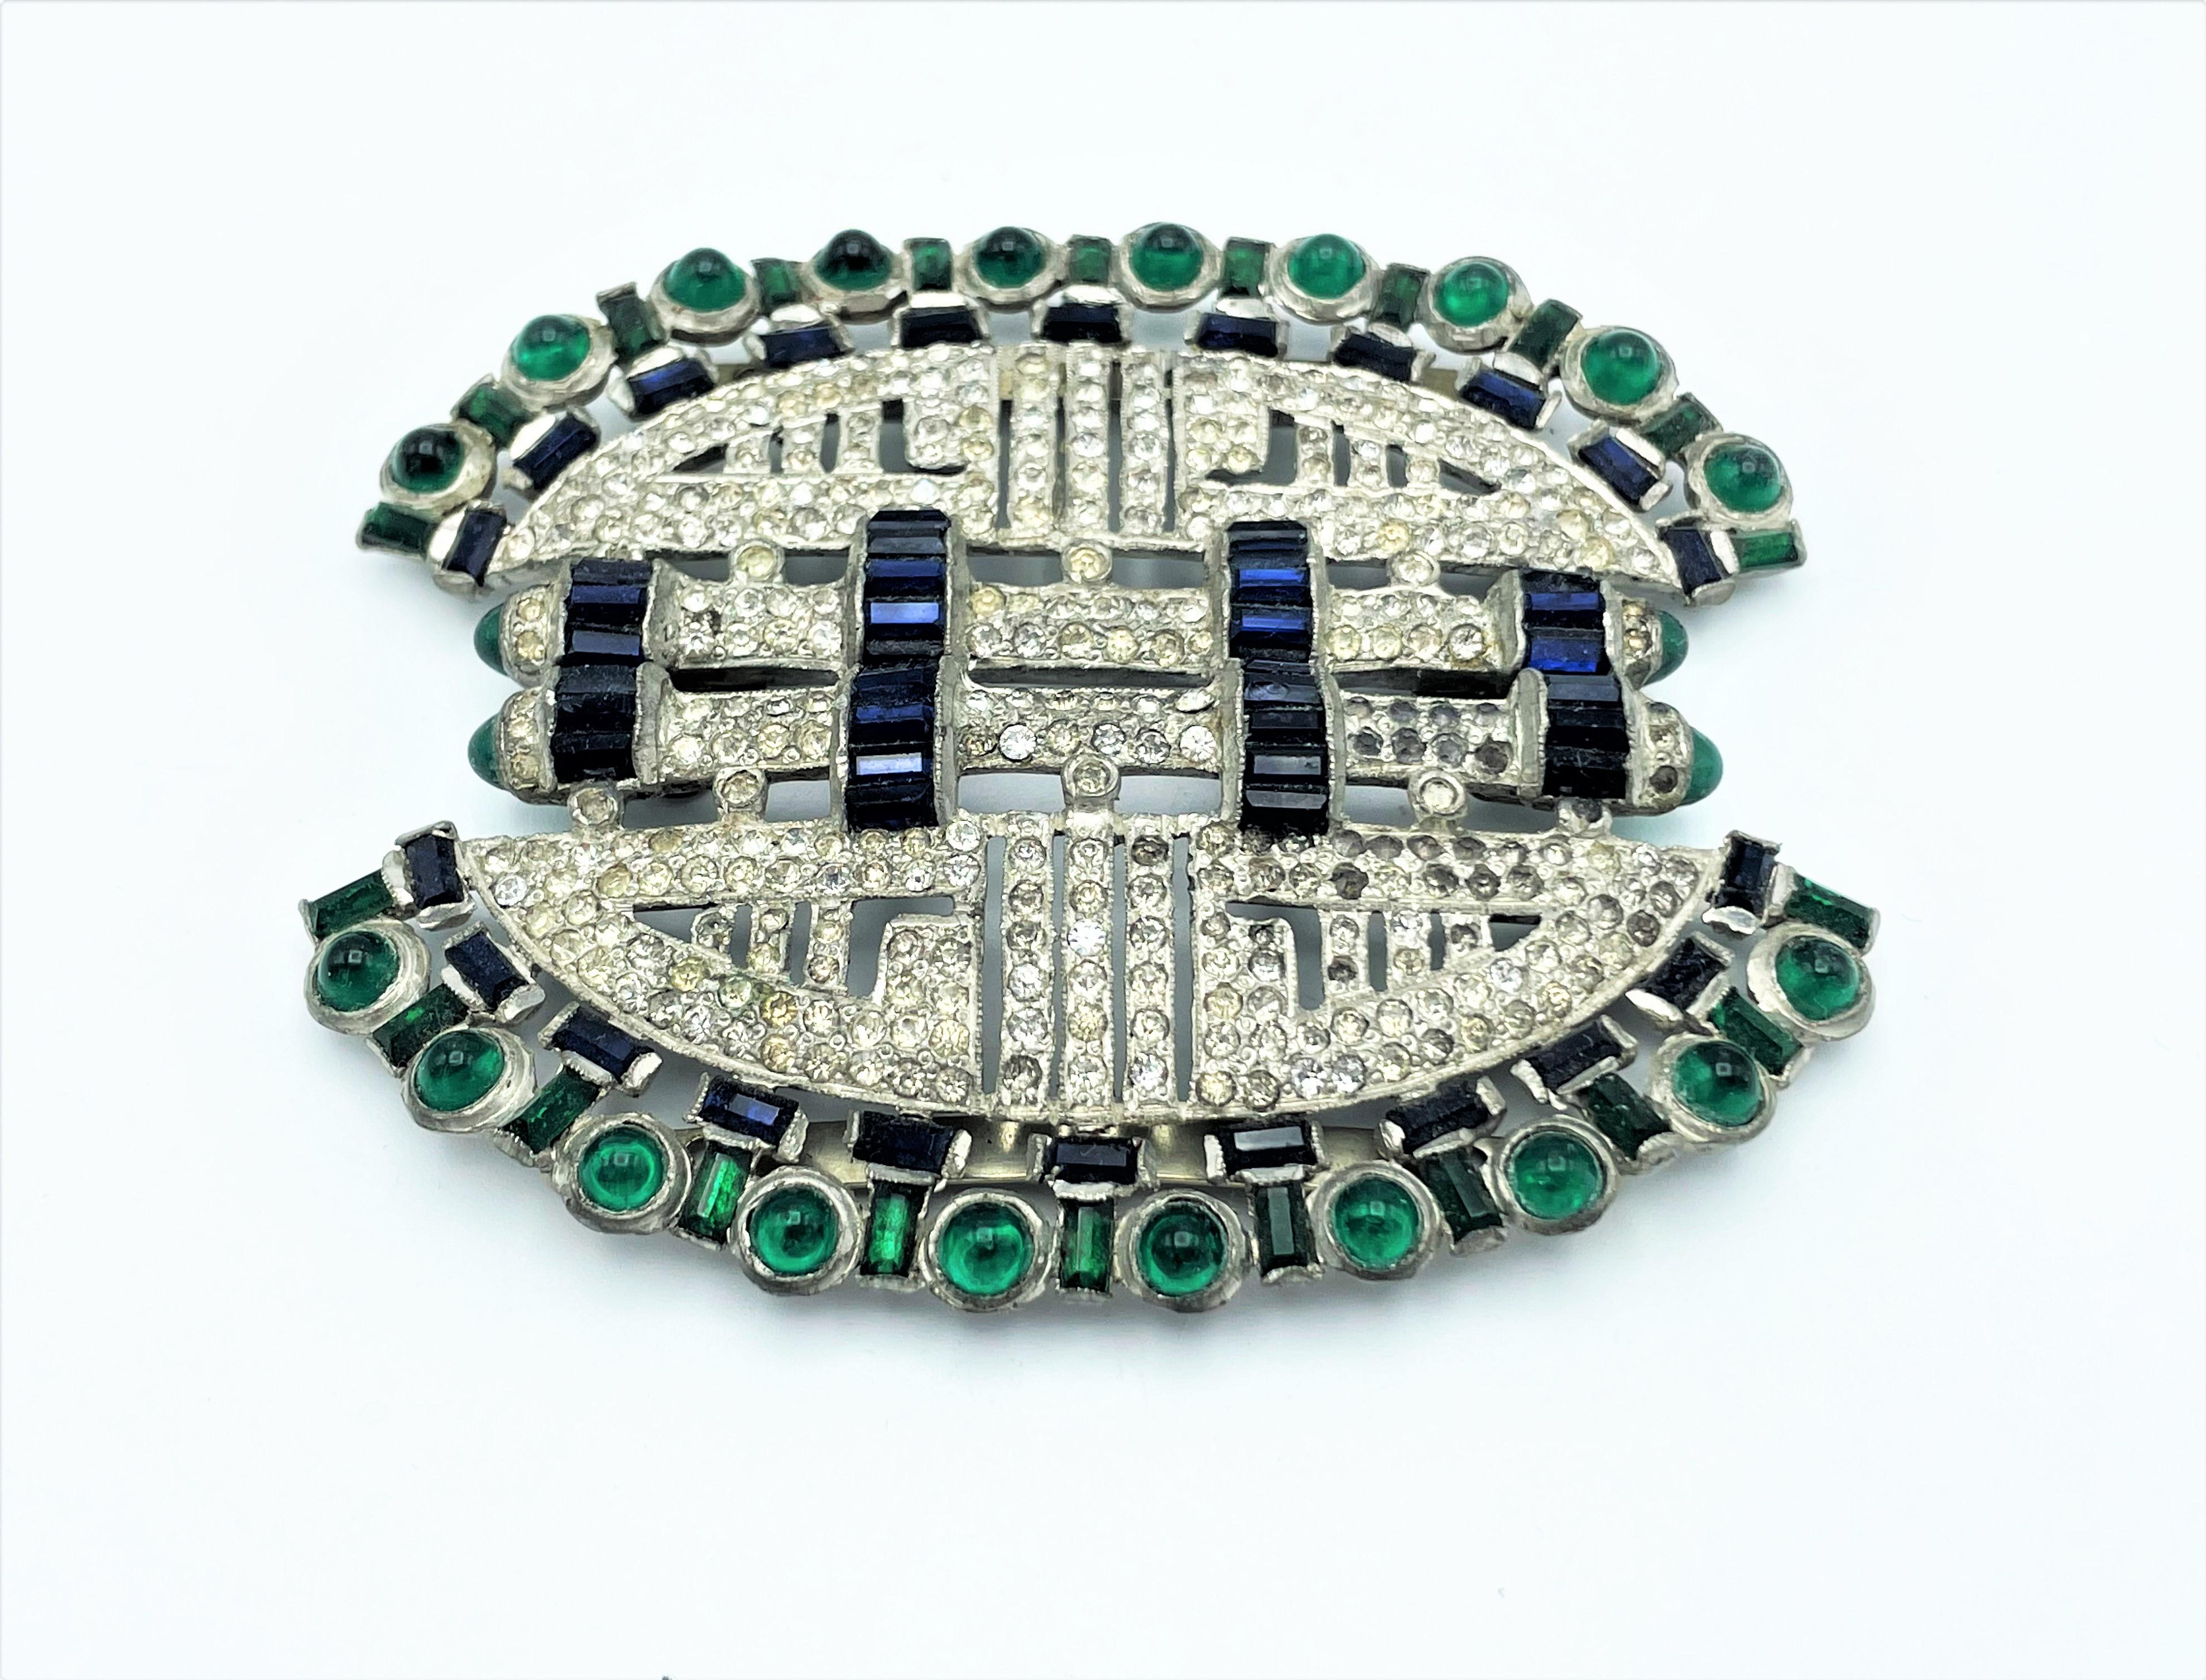 Mixed Cut Very rare art deco belt buckle 1930s/40s France, fully set with rhinestones For Sale